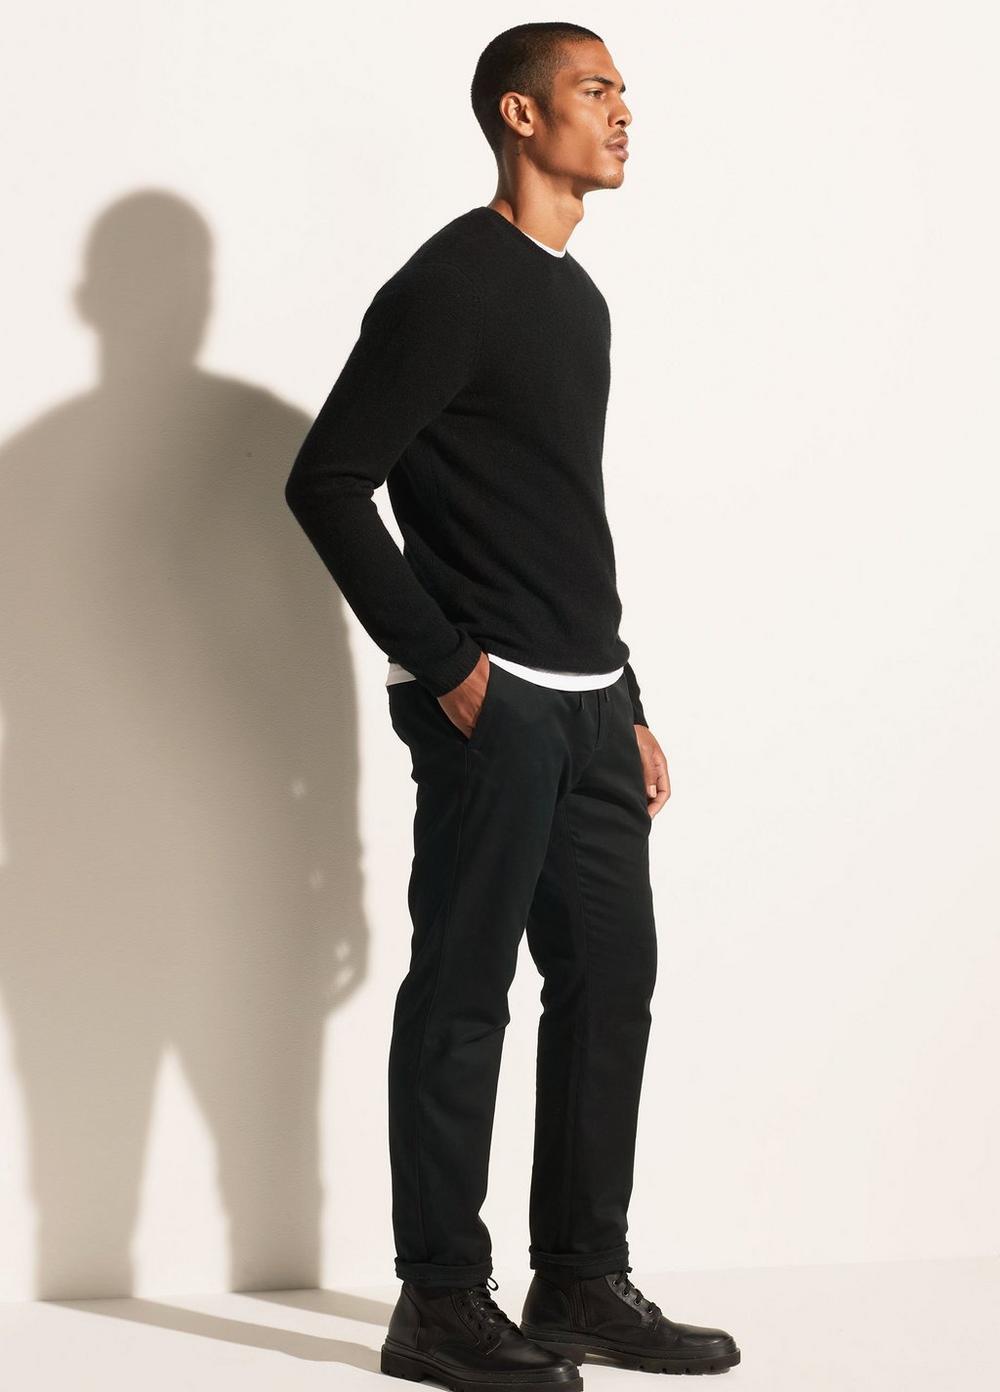 Cashmere Long Sleeve Crew